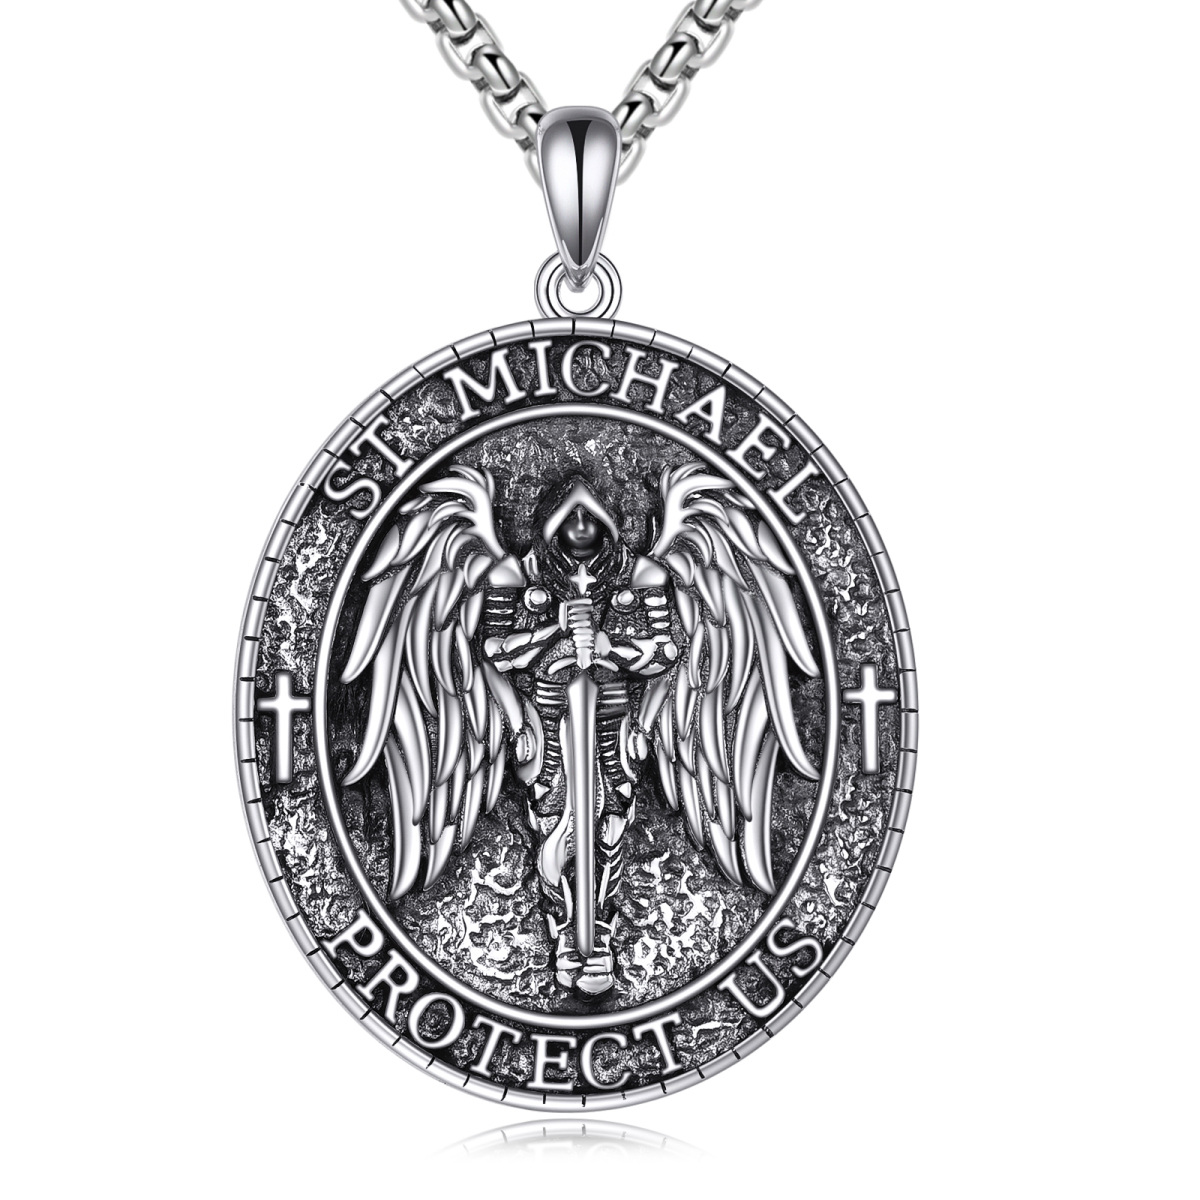 Sterling Silver Saint Michael Religious Pendant Necklace with Engraved Word for Men-1